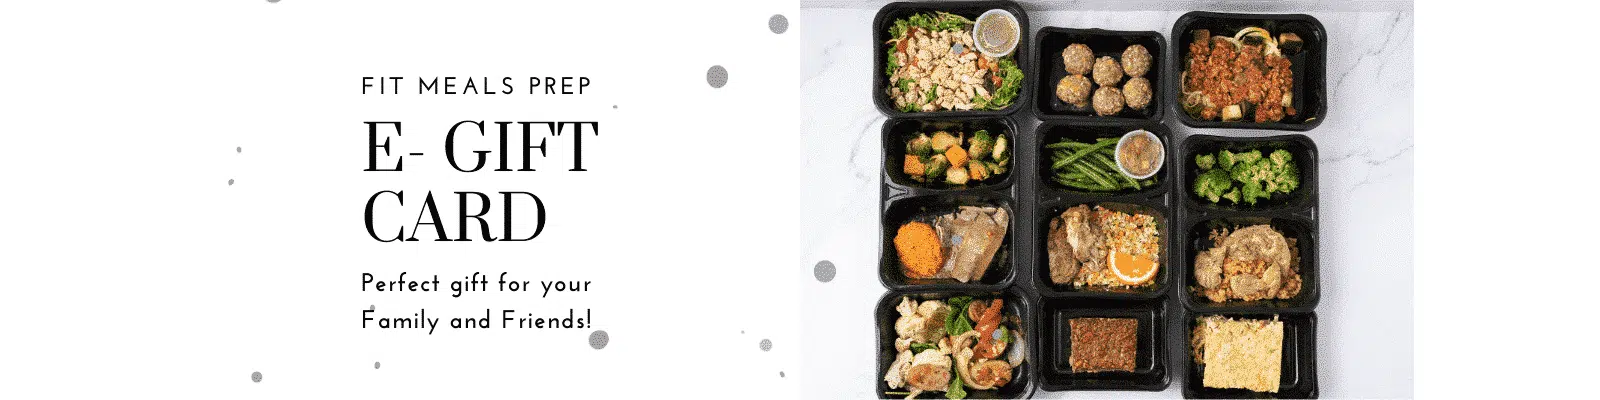 Meal Prep VS Meal Kits - FitEx Meals